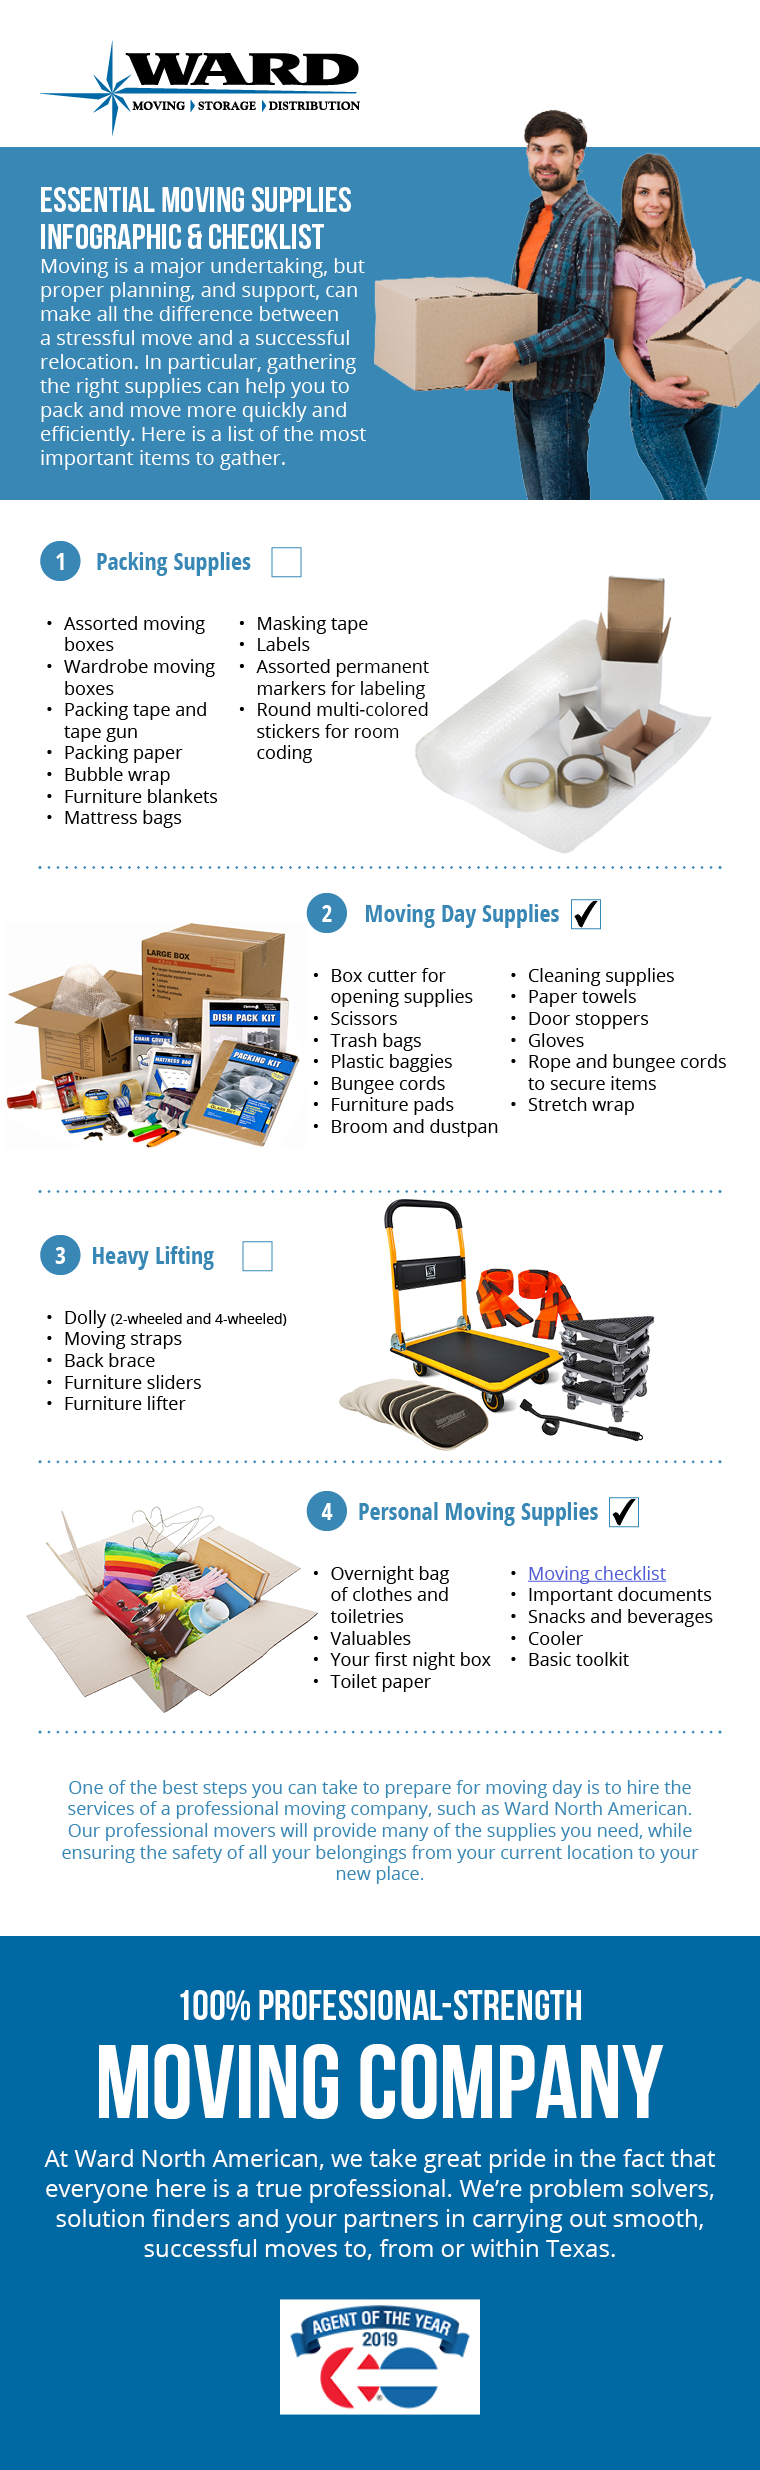 Packing and Moving Supplies You Must Have for Your Move